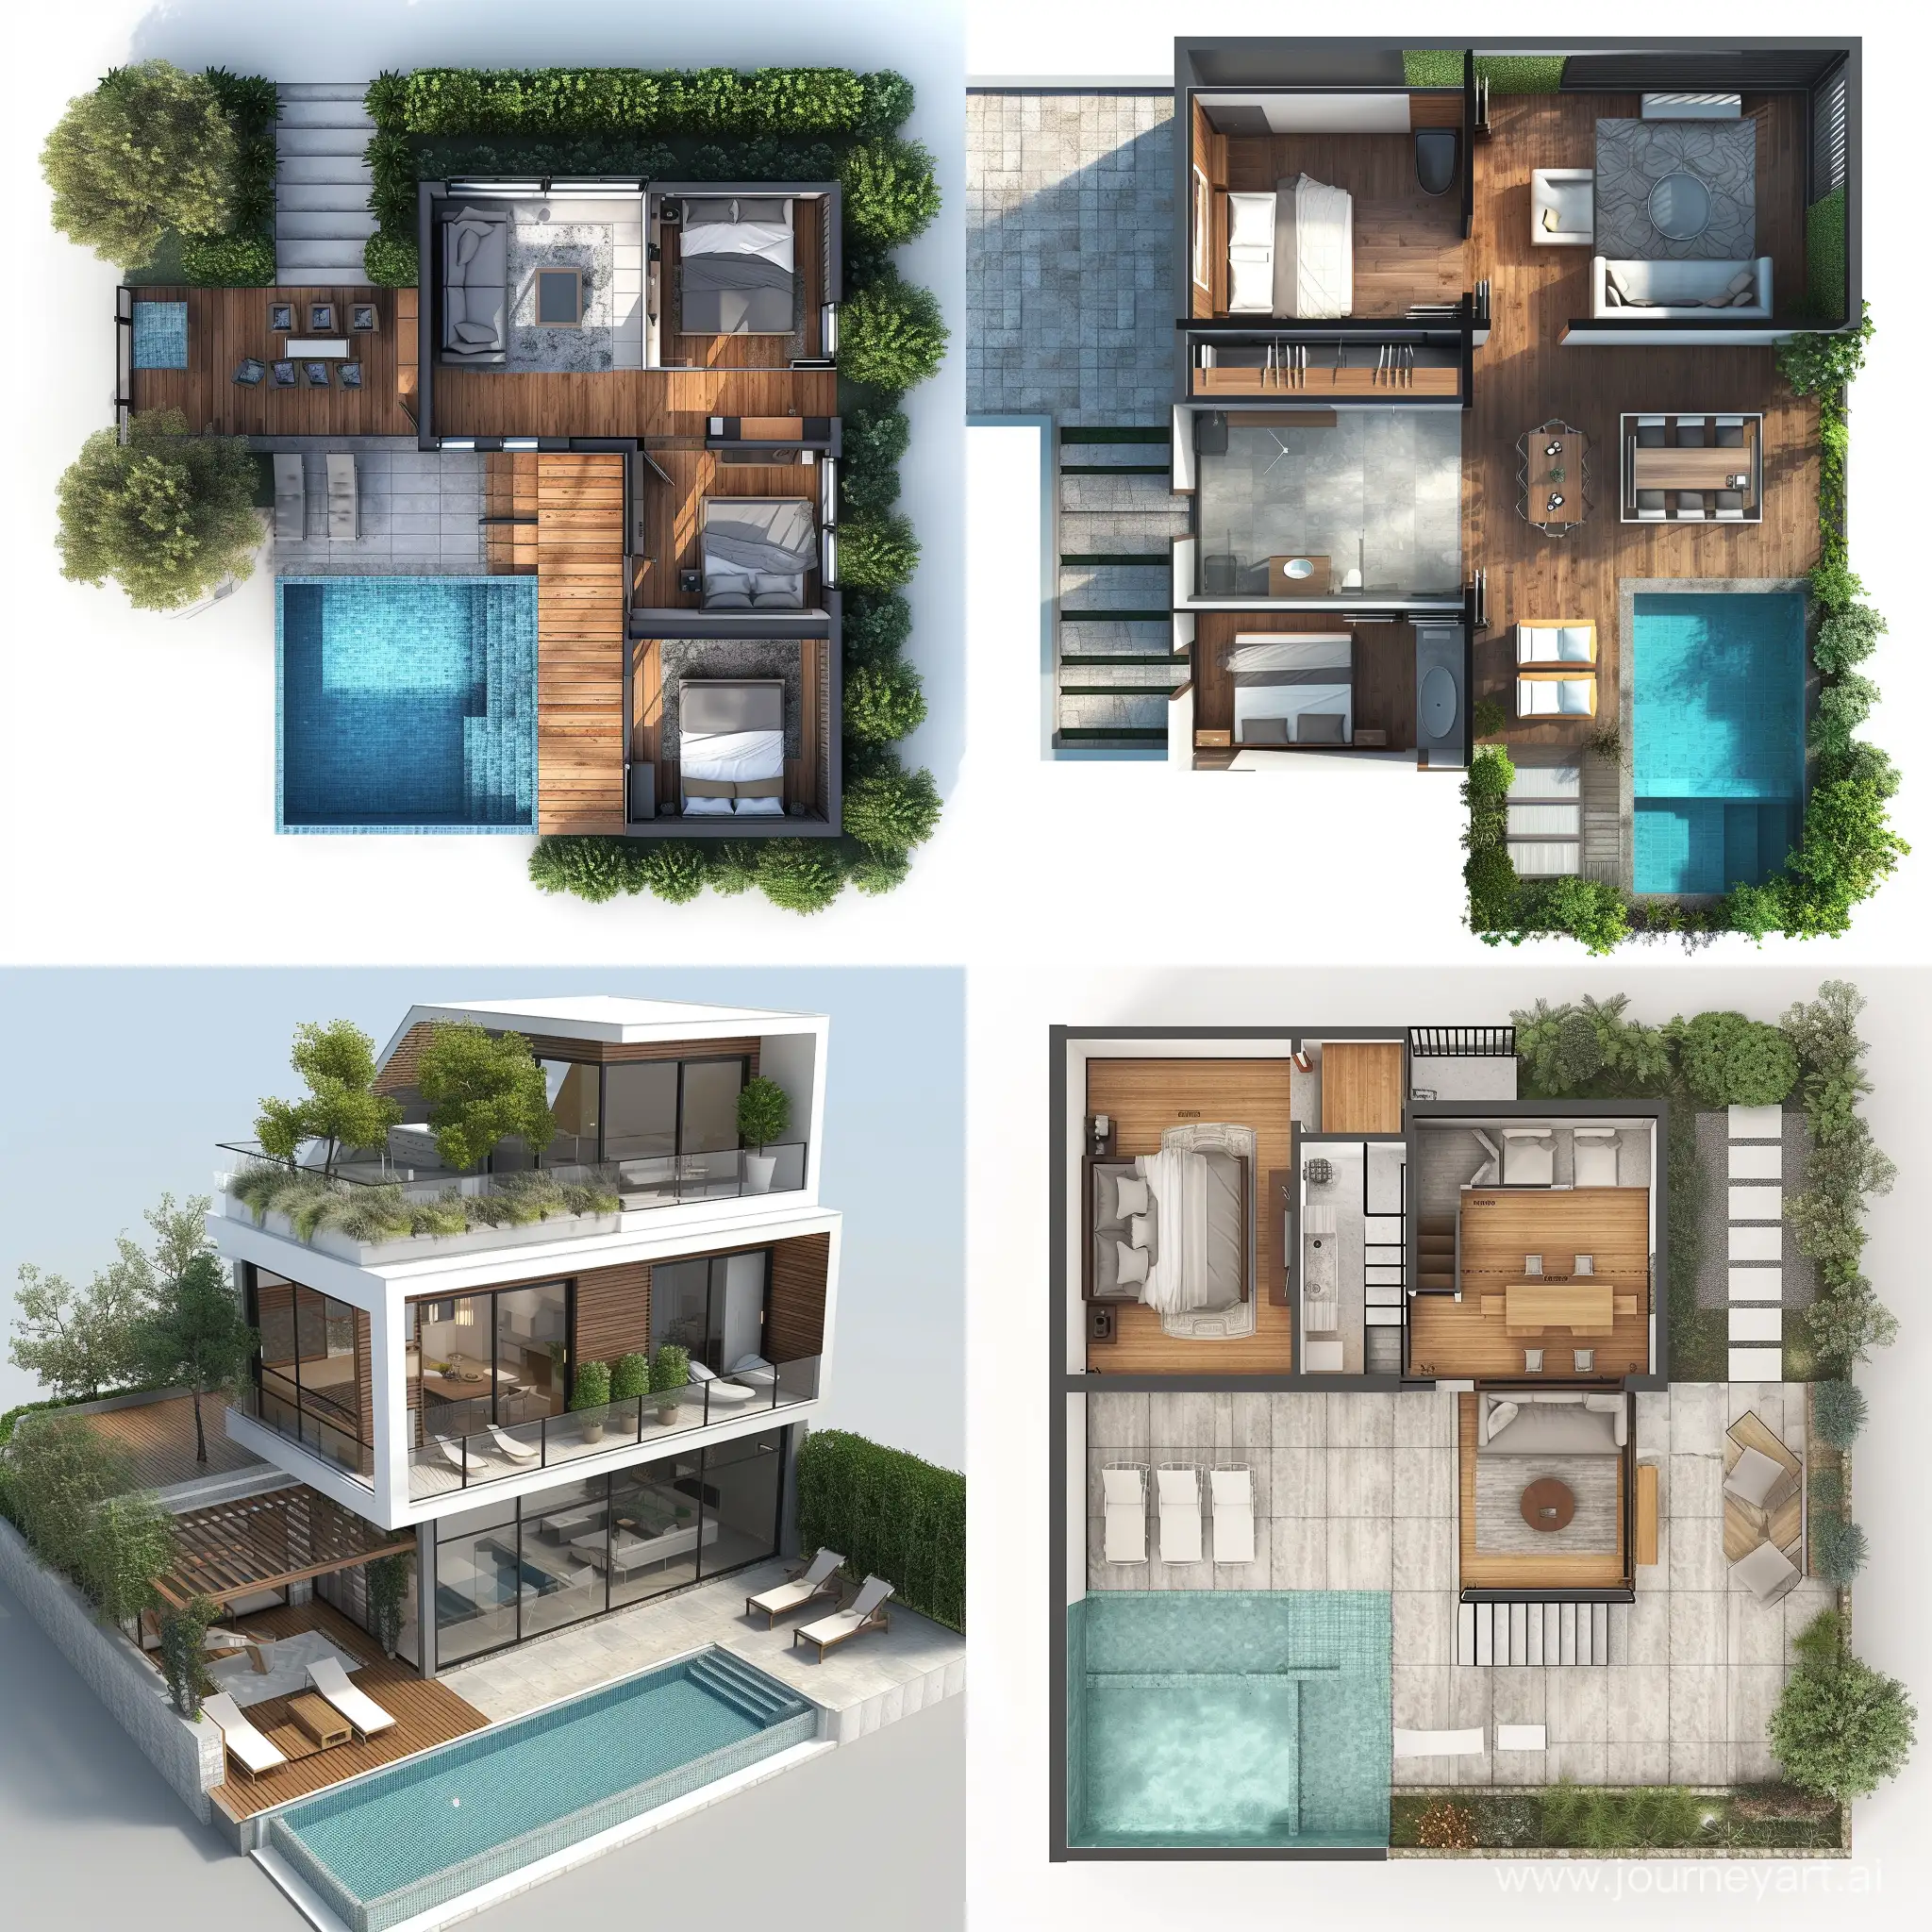 Modern-TwoStorey-House-Design-with-Inviting-Swimming-Pool